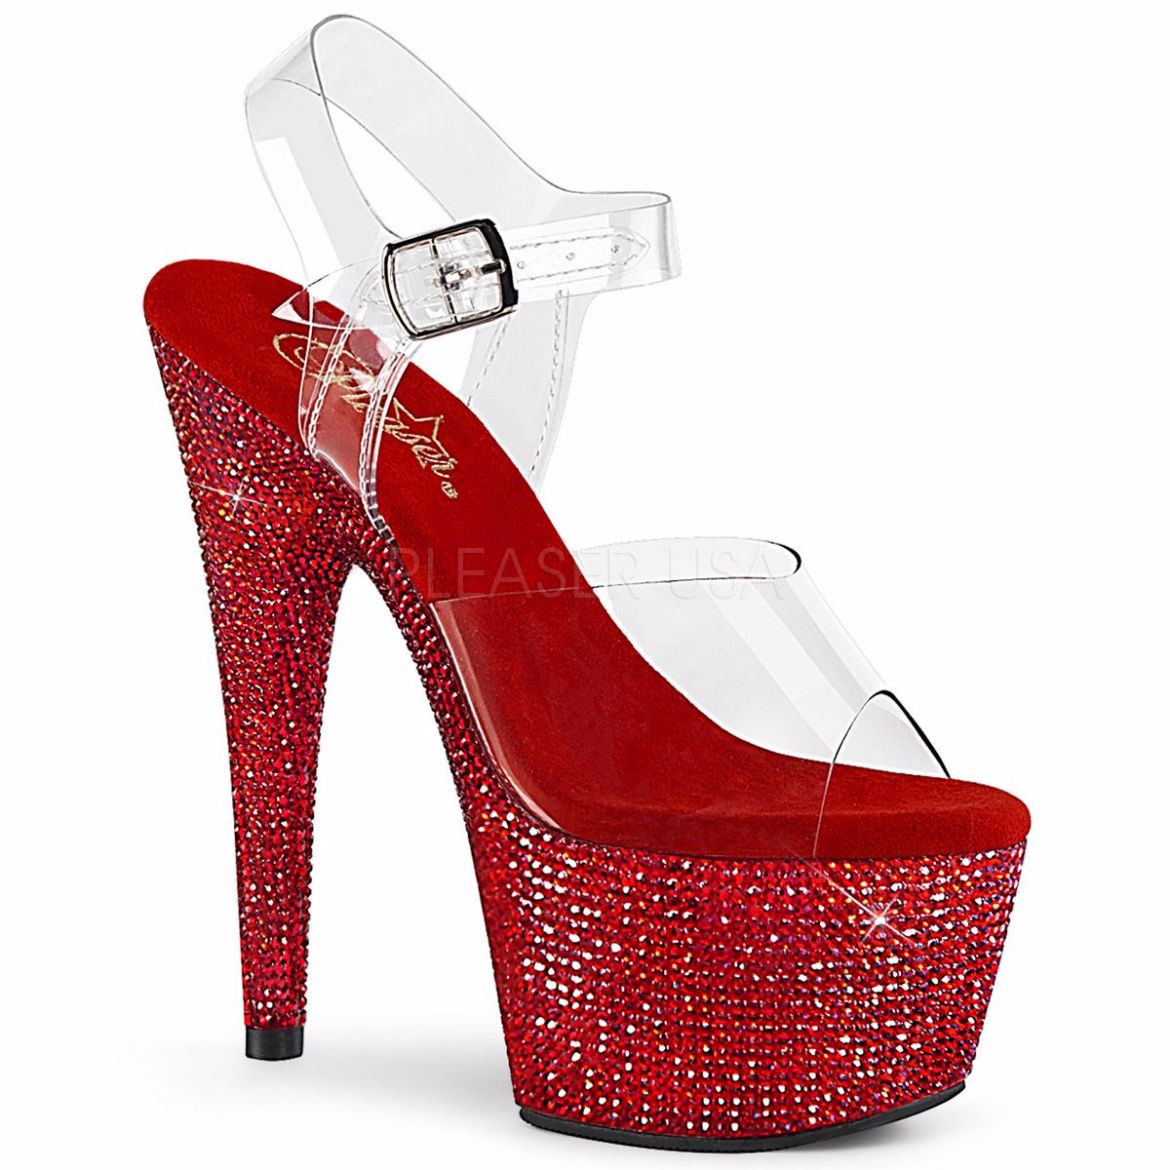 Product image of Pleaser BEJEWELED-708DM Clear/Red Rhinestones 7 inch (17.8 cm) Heel 2 3/4 inch (7 cm) Platform Ankle Strap Sandal With  Rhinestones Shoes